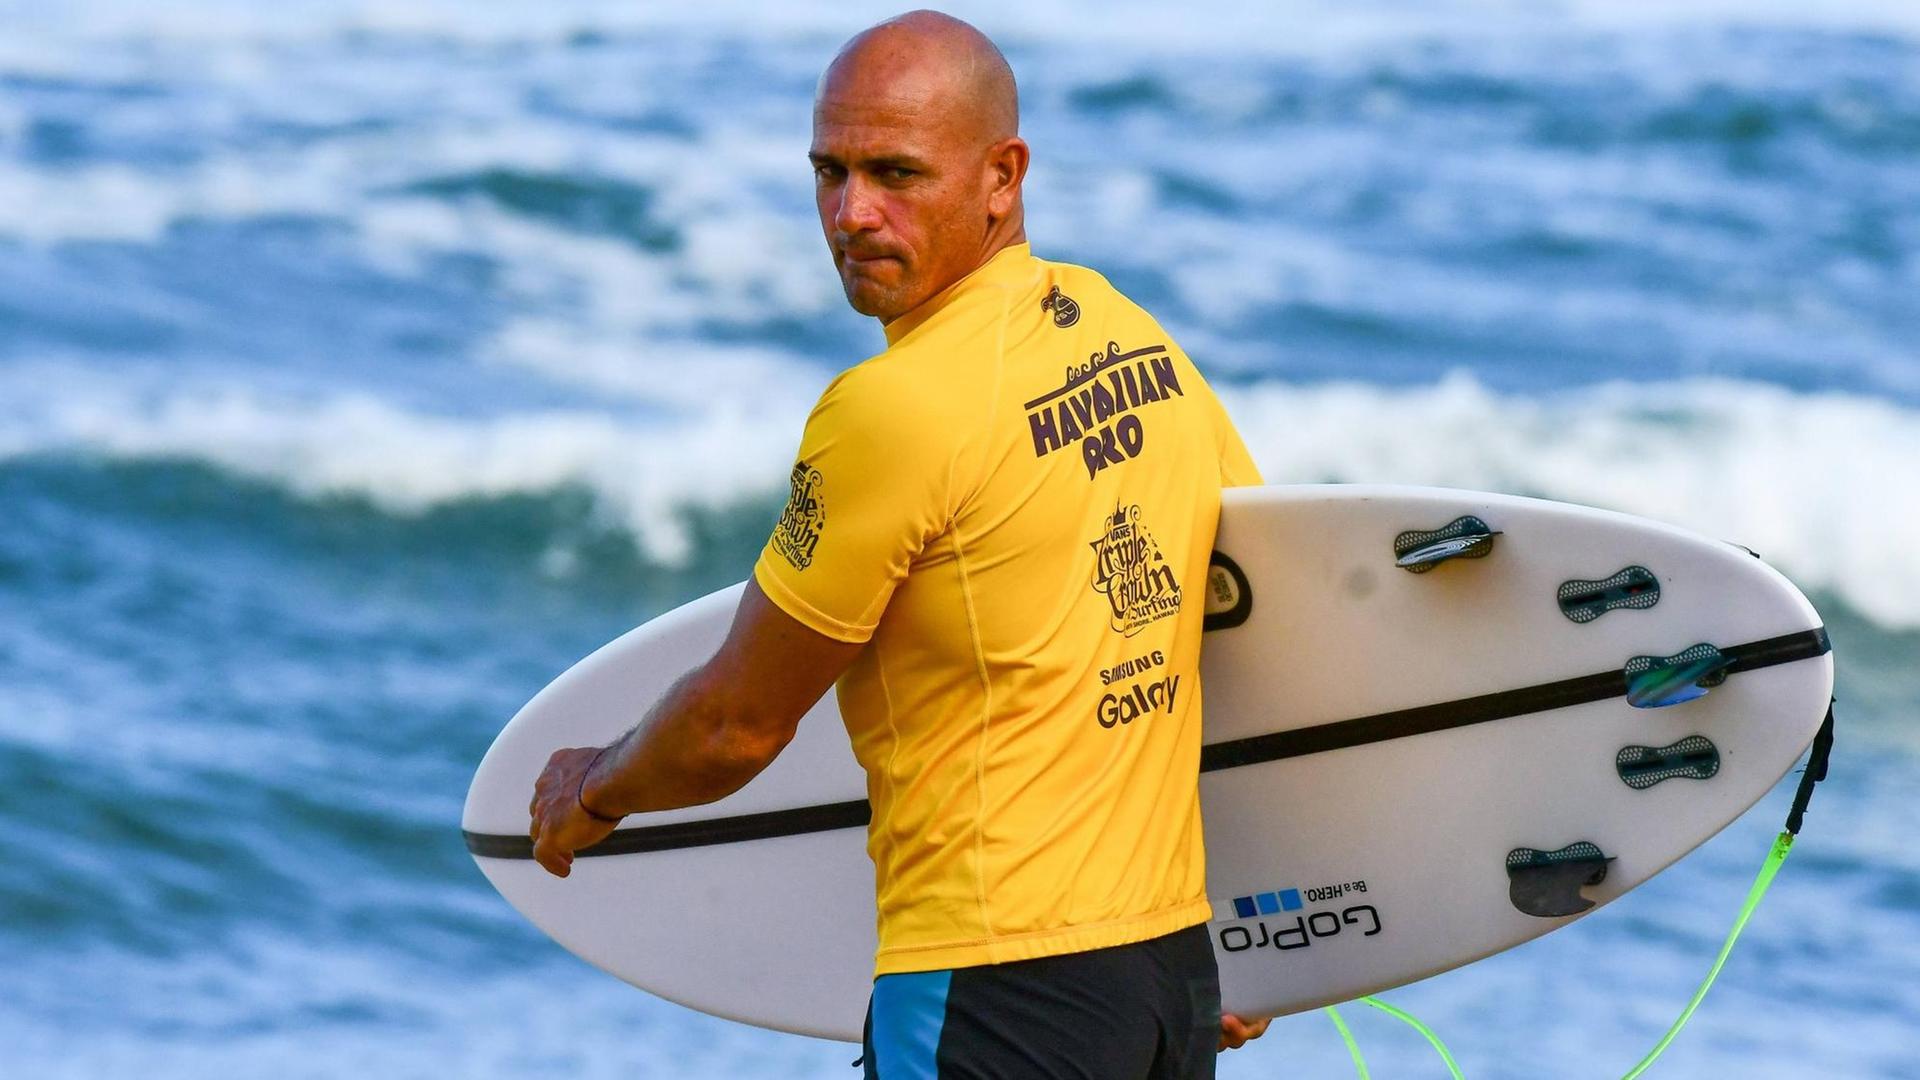 November 18, 2016 - Kelly Slater prepares to surf his heat during action at the final contest day of the Hawaiian Pro Contest at Haleiwa on the North Shore of Oahu, Hawaii which was won by newly crowned 2016 World Champion John John Florence . This completes the first jewel of the Vans Triple Crown of Surfing which continues next with the Vans World Cup of Surfing at Sunset Beach and ends with the Billabong Pipeline Masters. - /CSM WSL; World Surfing League Hawaiian Pro Haleiwa Surf Contest - Vans Triple Crown NOV18 PUBLICATIONxINxGERxSUIxAUTxONLY - ZUMAc04_ 20161118_zaf_c04_261 November 18 2016 Kelly Slater Prepares to Surf His Heat during Action AT The Final Contest Day of The Hawaiian Pro Contest AT Haleiwa ON The North Shore of Oahu Hawaii Which what Won by Newly crowned 2016 World Champion John John Florence This completes The First Jewel of The Vans Triple Crown of Surfing Which Continues Next with The Vans World Cup of Surfing AT Sunset Beach and Ends with The Bong Pipeline Masters CSM WSL World Surfing League Hawaiian Pro Haleiwa Surf Contest Vans Triple Crown NOV18 PUBLICATIONxINxGERxSUIxAUTxONLY ZUMAc04_